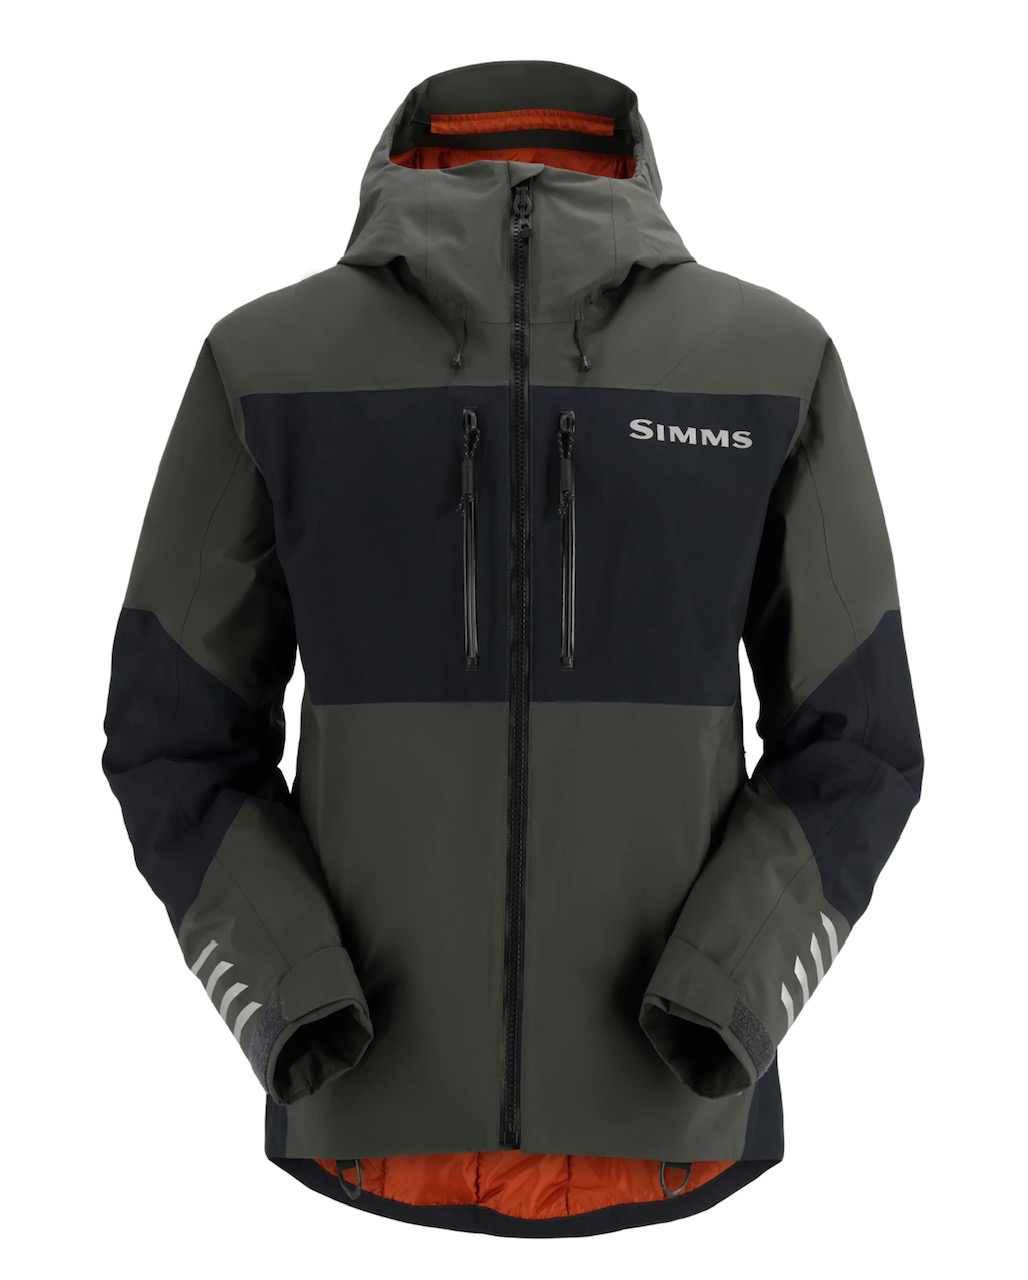 Simms M's Guide Insulated Jacket - Carbon - Medium